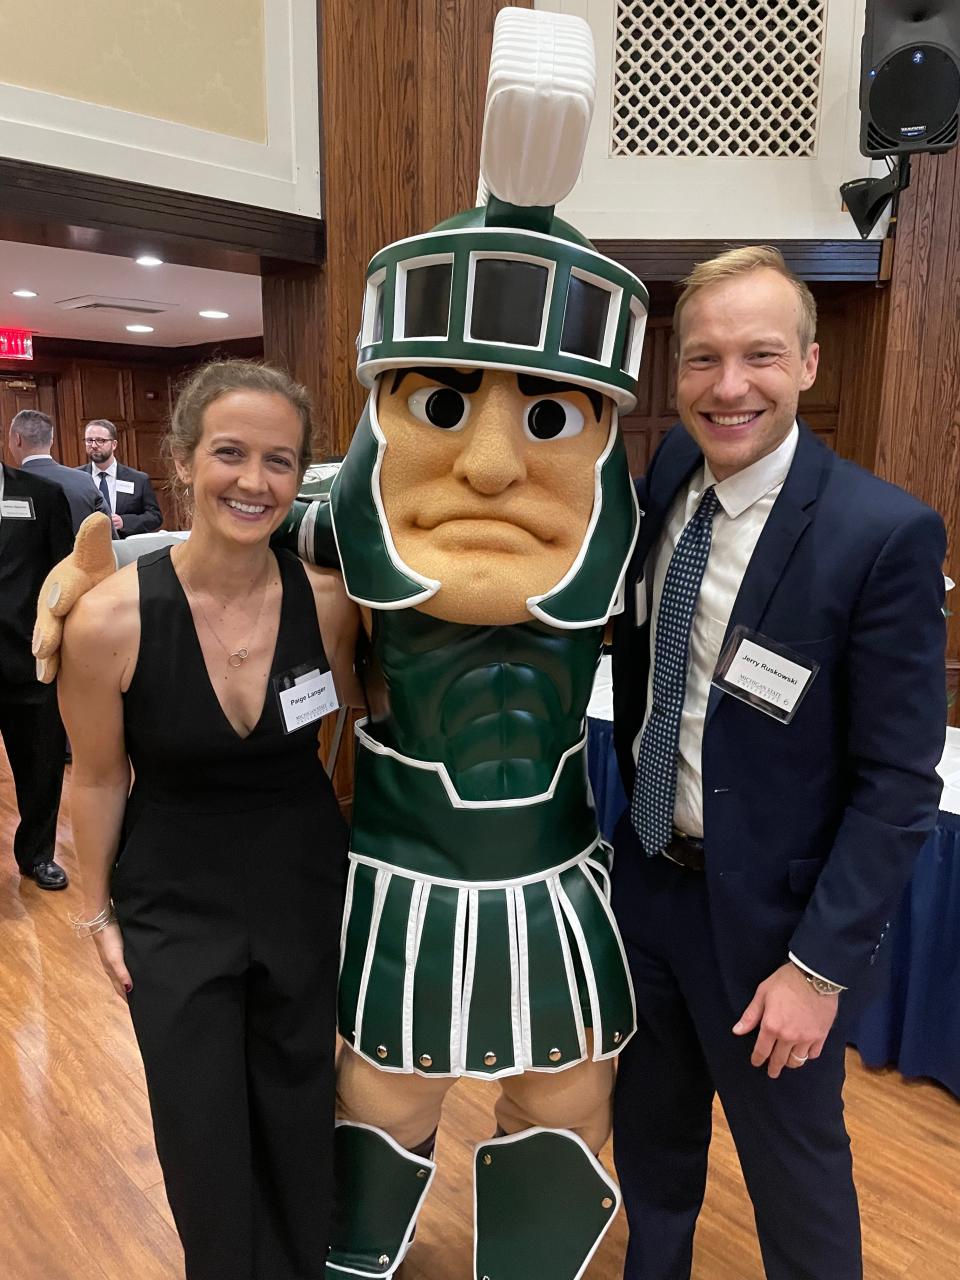 Jerry Ruskowski and his wife, Paige Langer, pose with Sparty, Michigan State University's mascot.